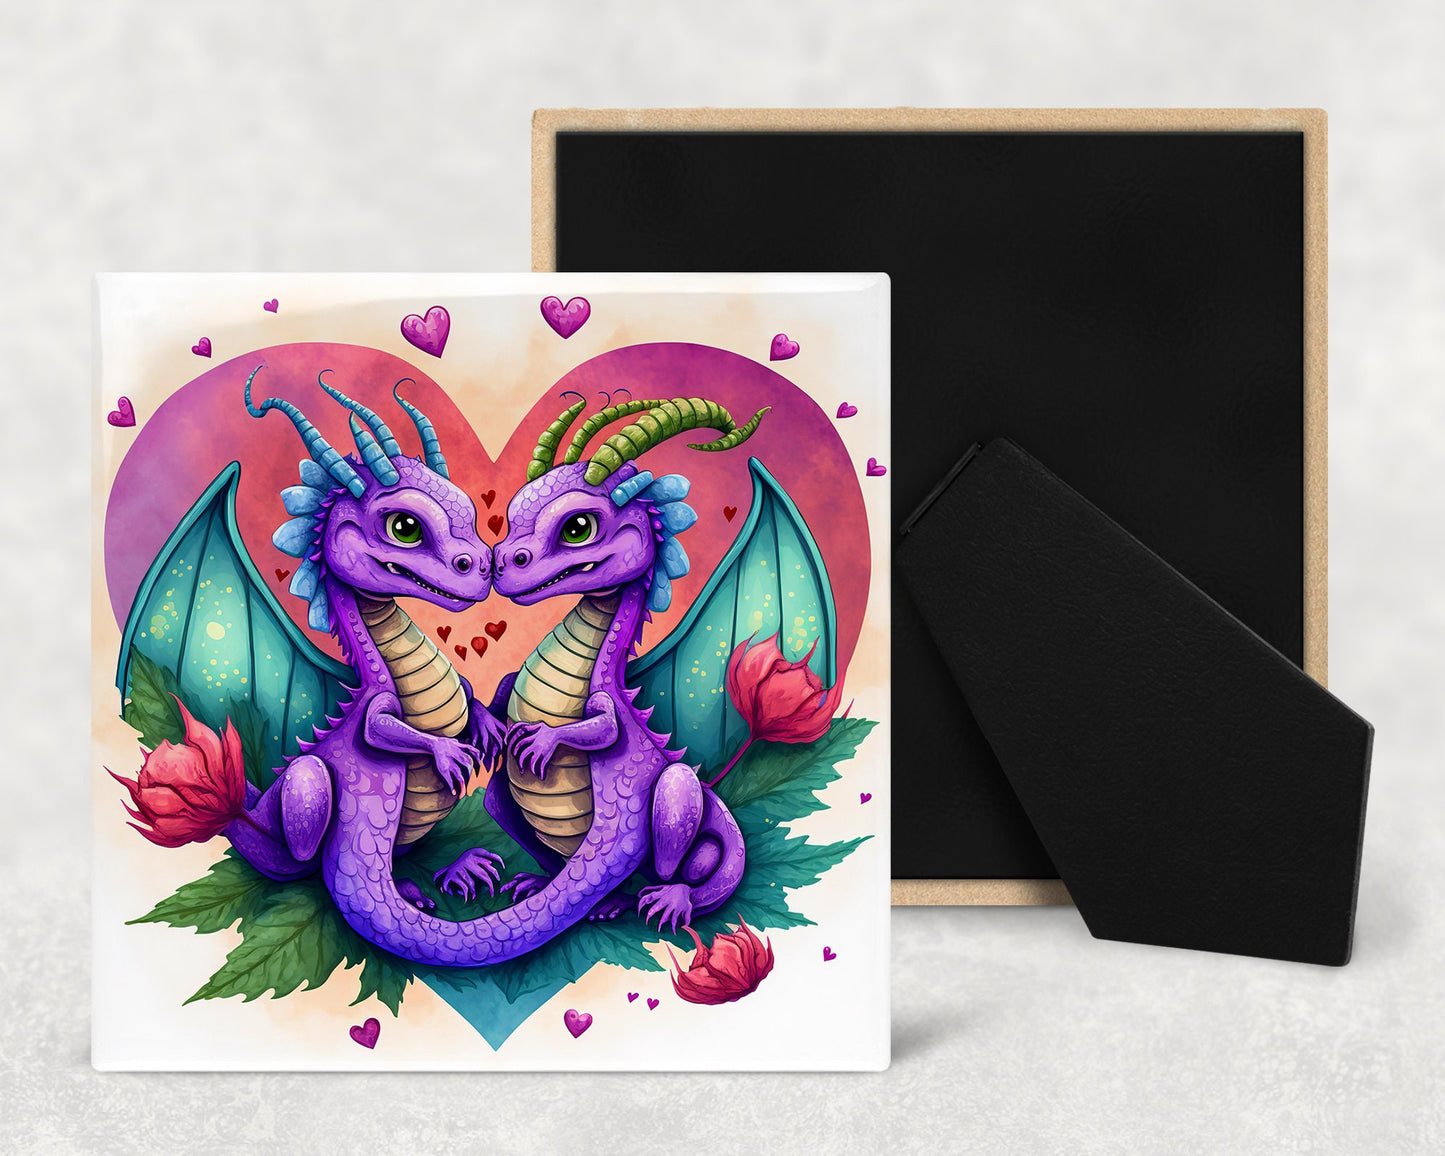 Cute Cartoon Dragons In Love Decorative Ceramic Tile Set with Optional Easel Back - Available in 4 sizes - Set of 4